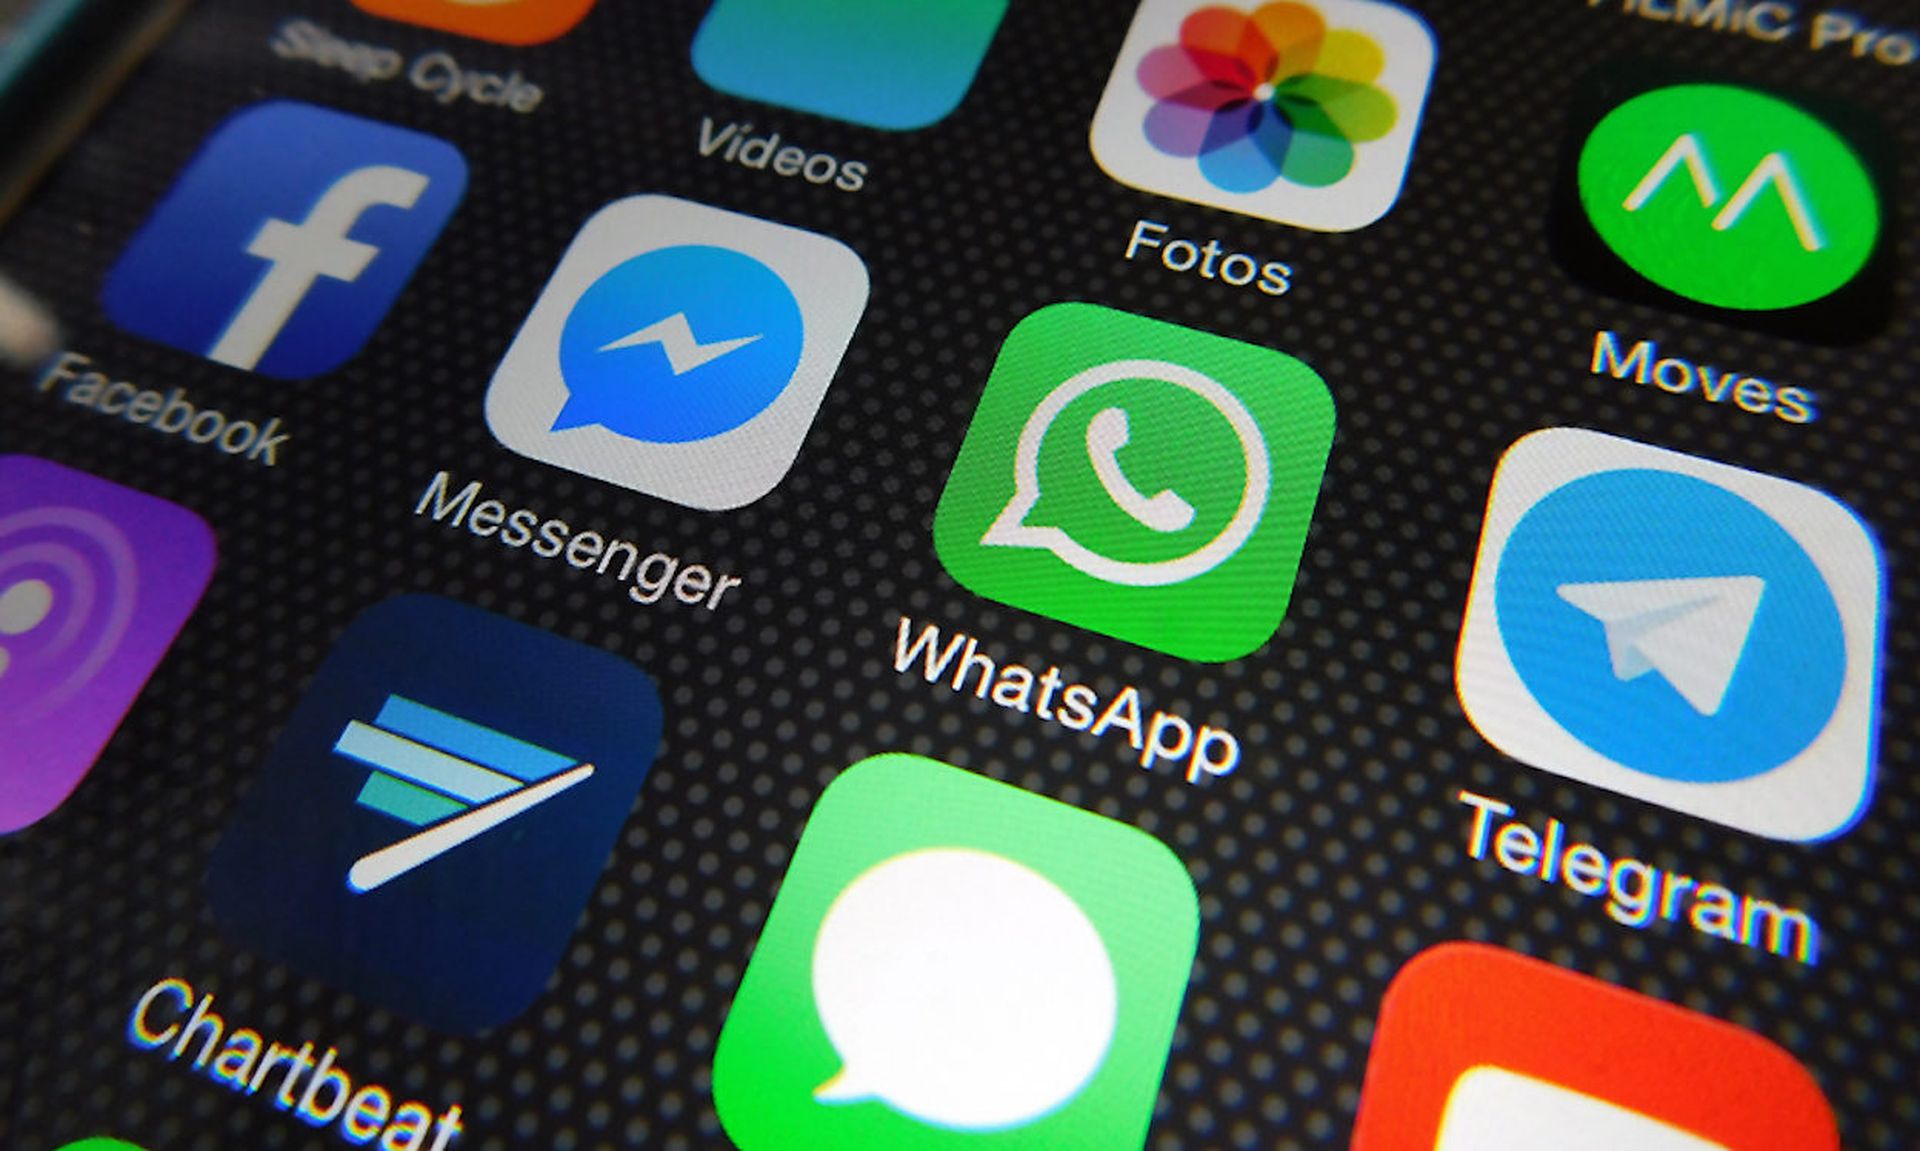 Researchers found a vulnerability about two years ago in the Android versions of WhatsApp and Telegram that could let hackers manipulate media files sent via the apps. Today’s columnist, Brian C. Reed of NowSecure, offers some insights on how continuous mobile app security can protect companies from similar vulnerabilities.